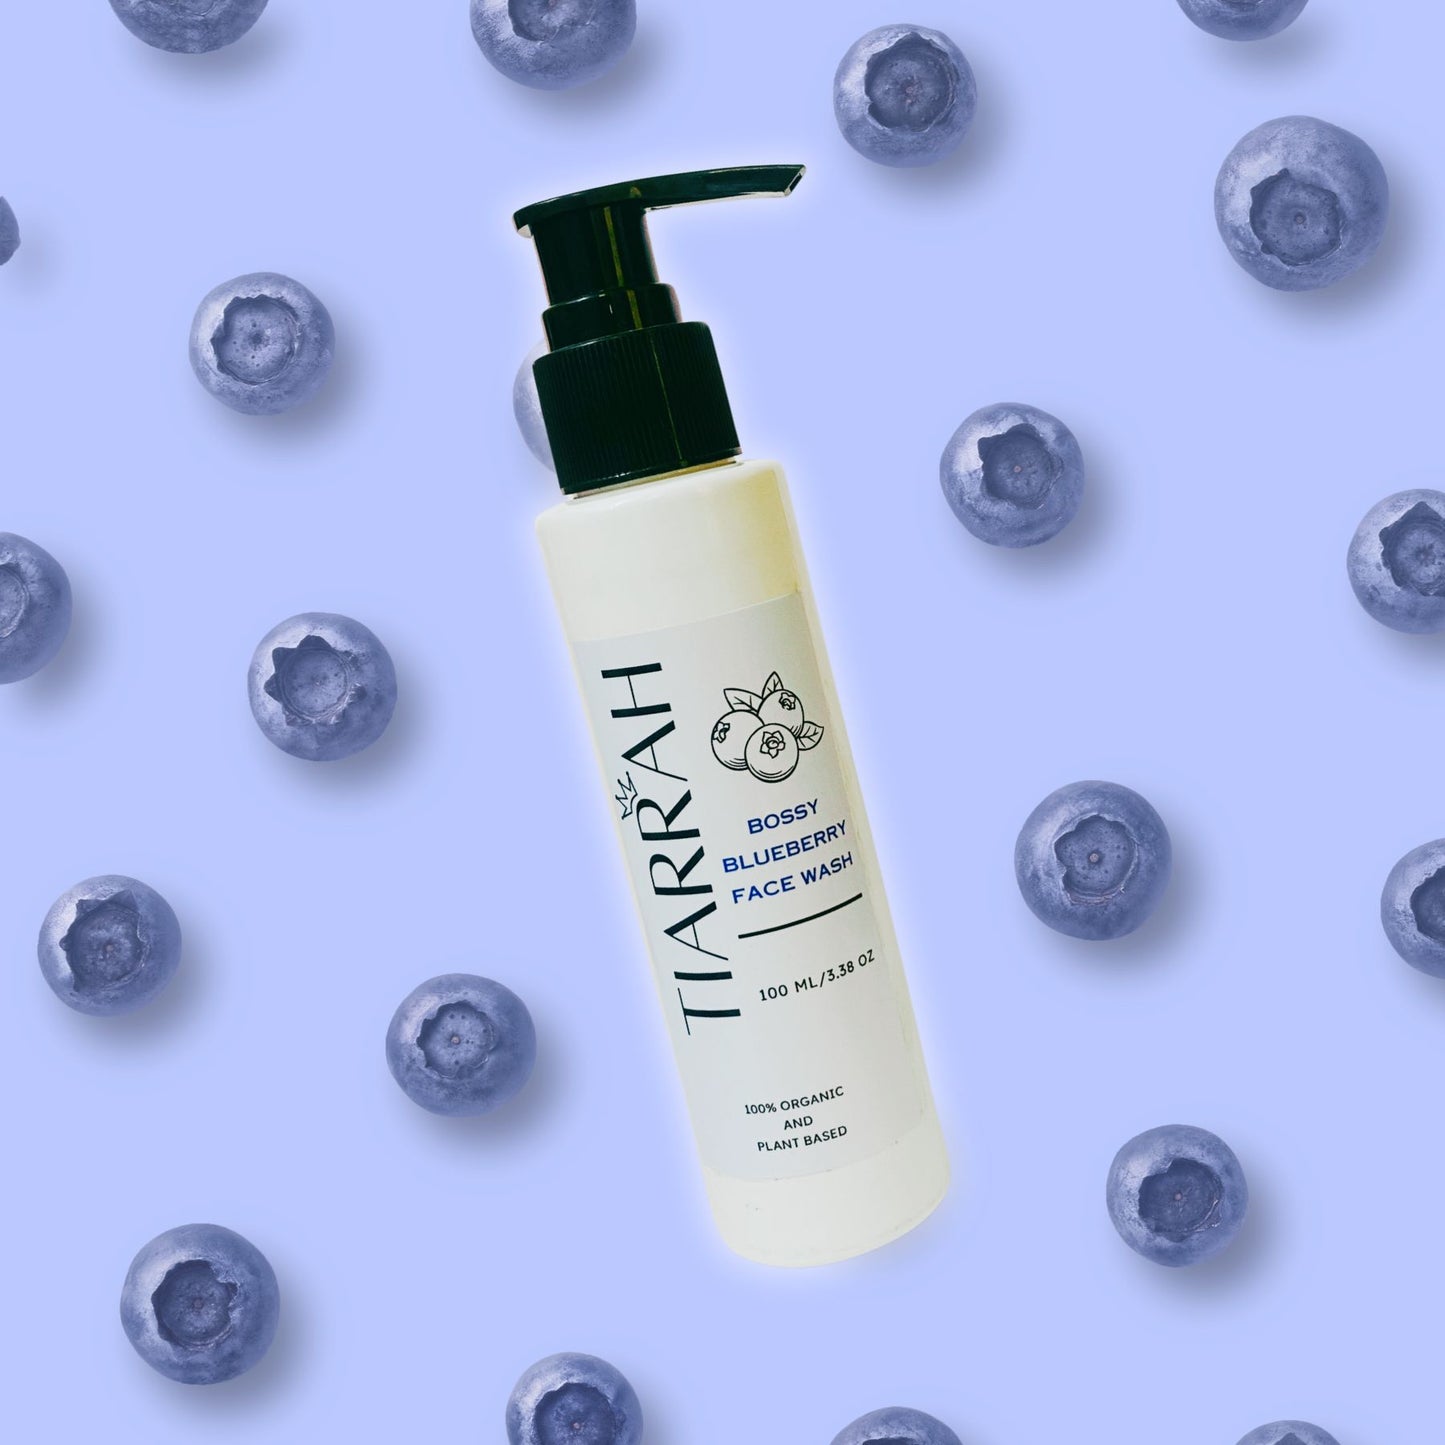 Luxury Blueberry Face Wash by Tiarrah: Organic, Non-Toxic - The Luxury Bath and Body Shop